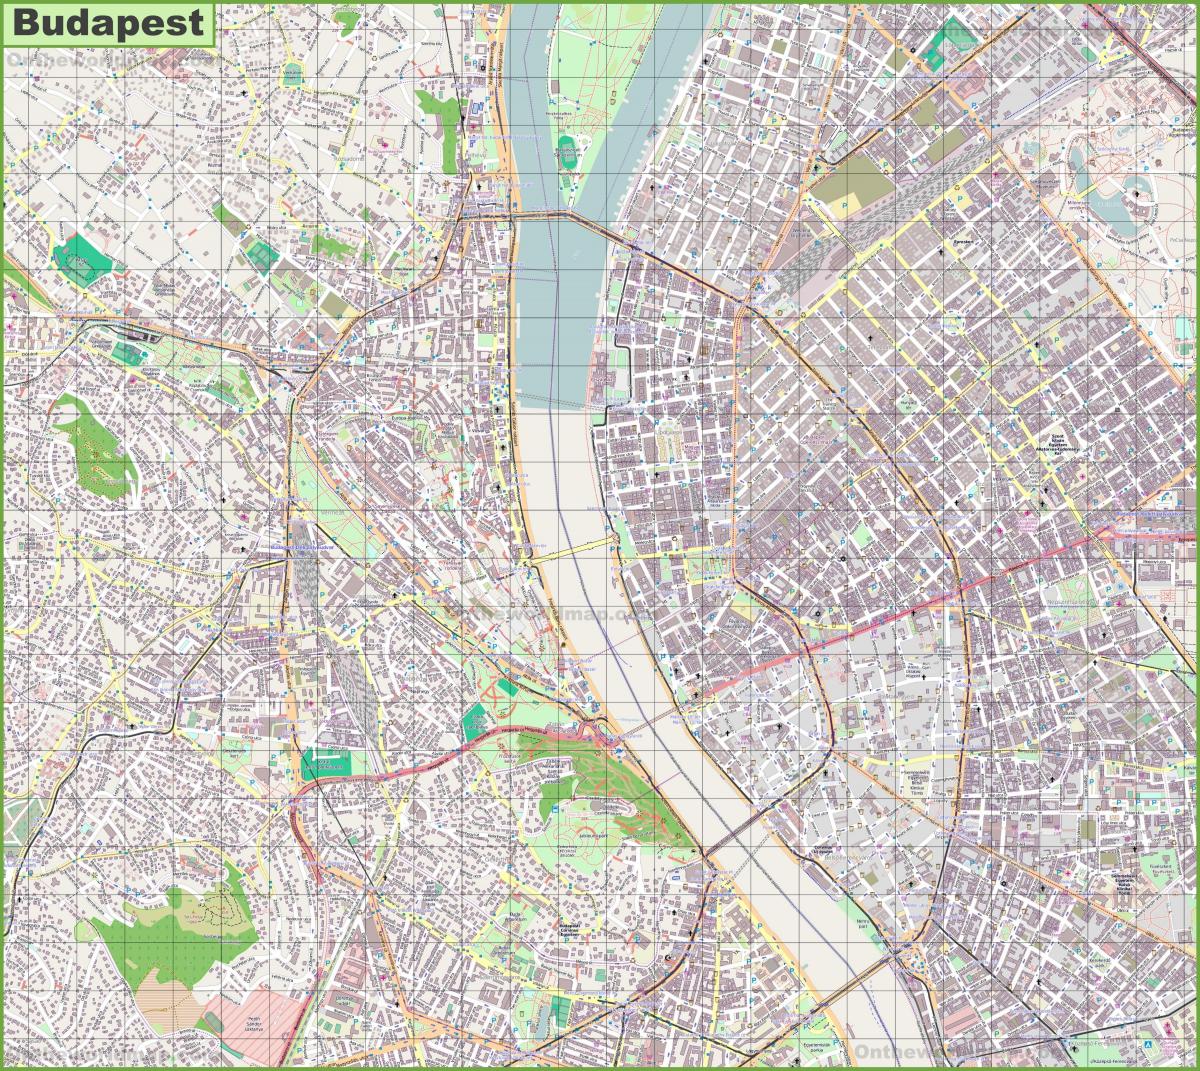 Budapest streets map